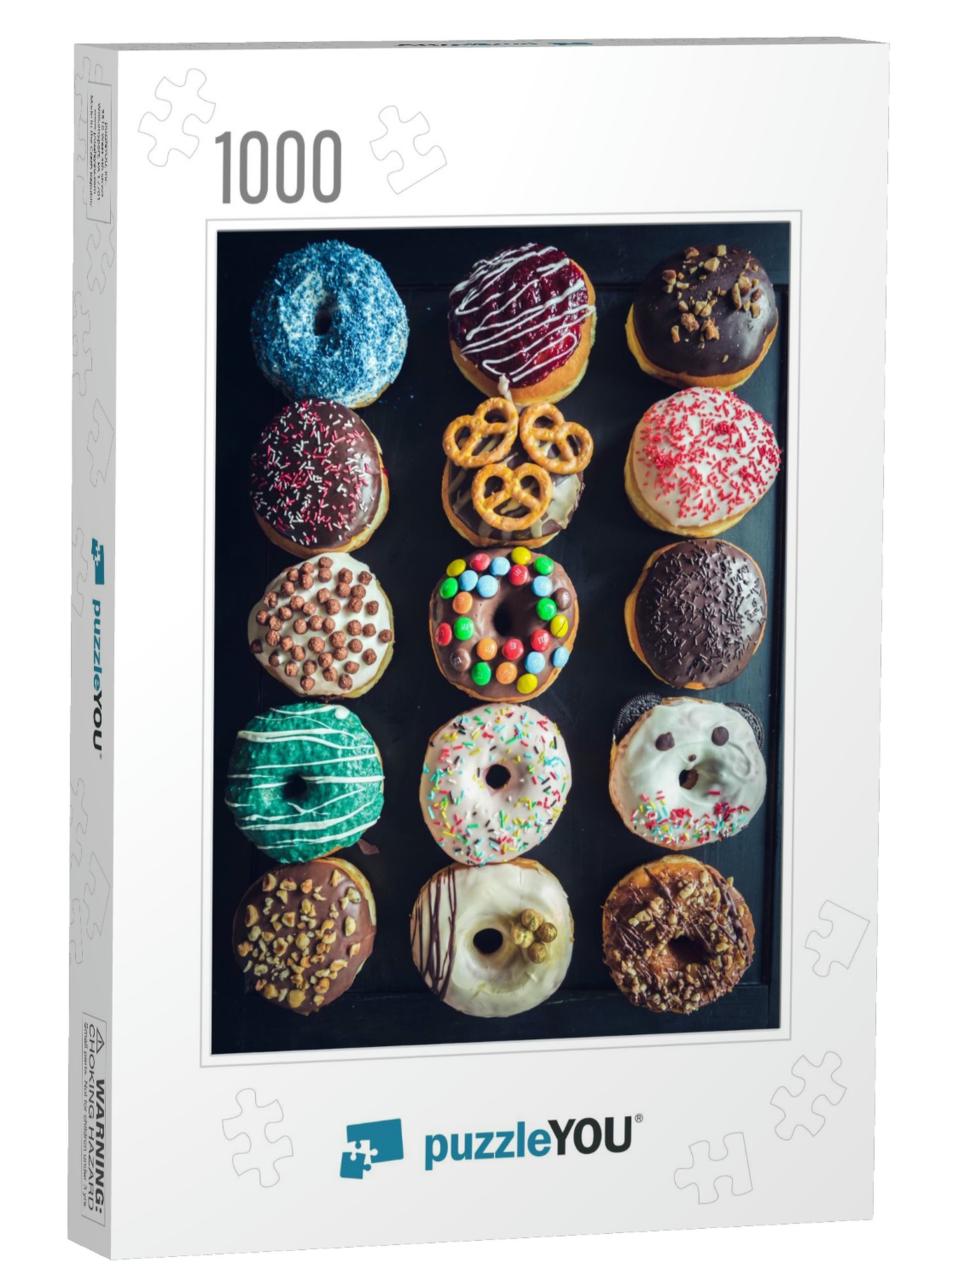 Sweet Glazed Donuts Served on the Table... Jigsaw Puzzle with 1000 pieces